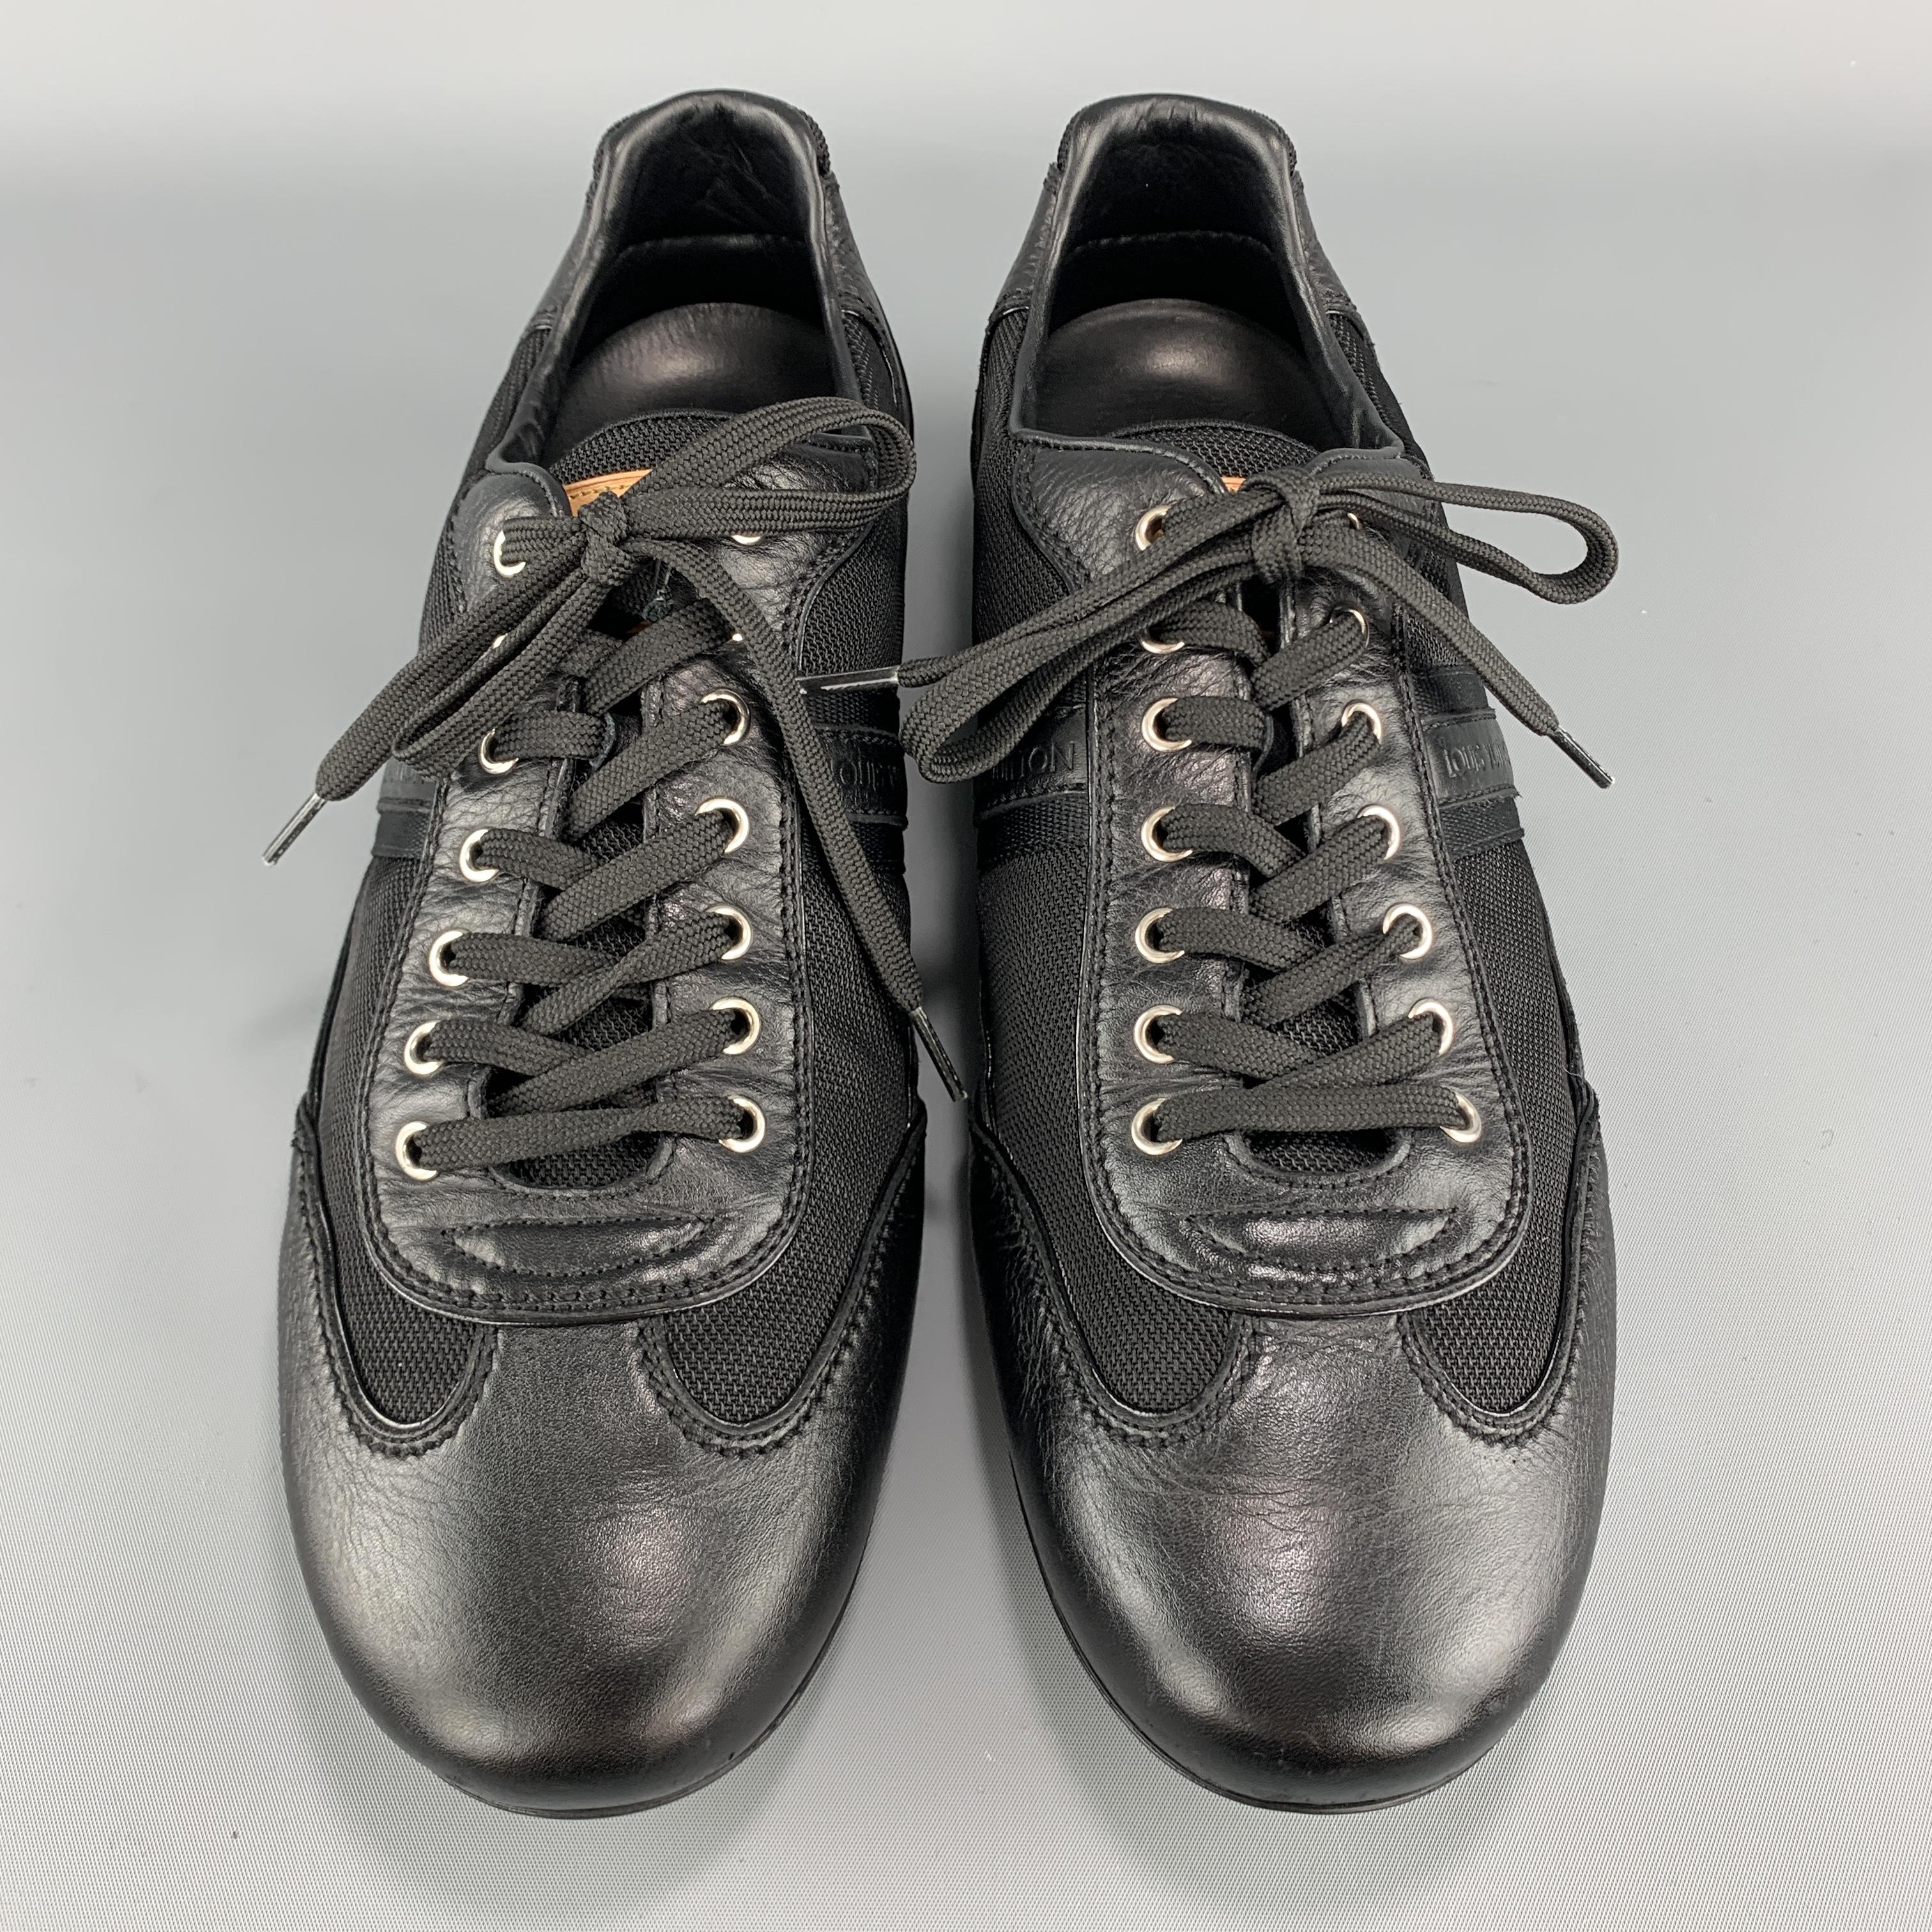 LOUIS VUITTON sneakers come in black canvas with leather details, lace up front, and rubber monogram textured back. Made in Italy.

Excellent Pre-Owned Condition.
Marked: UK 9

Outsole: 12 x 3.5 in.